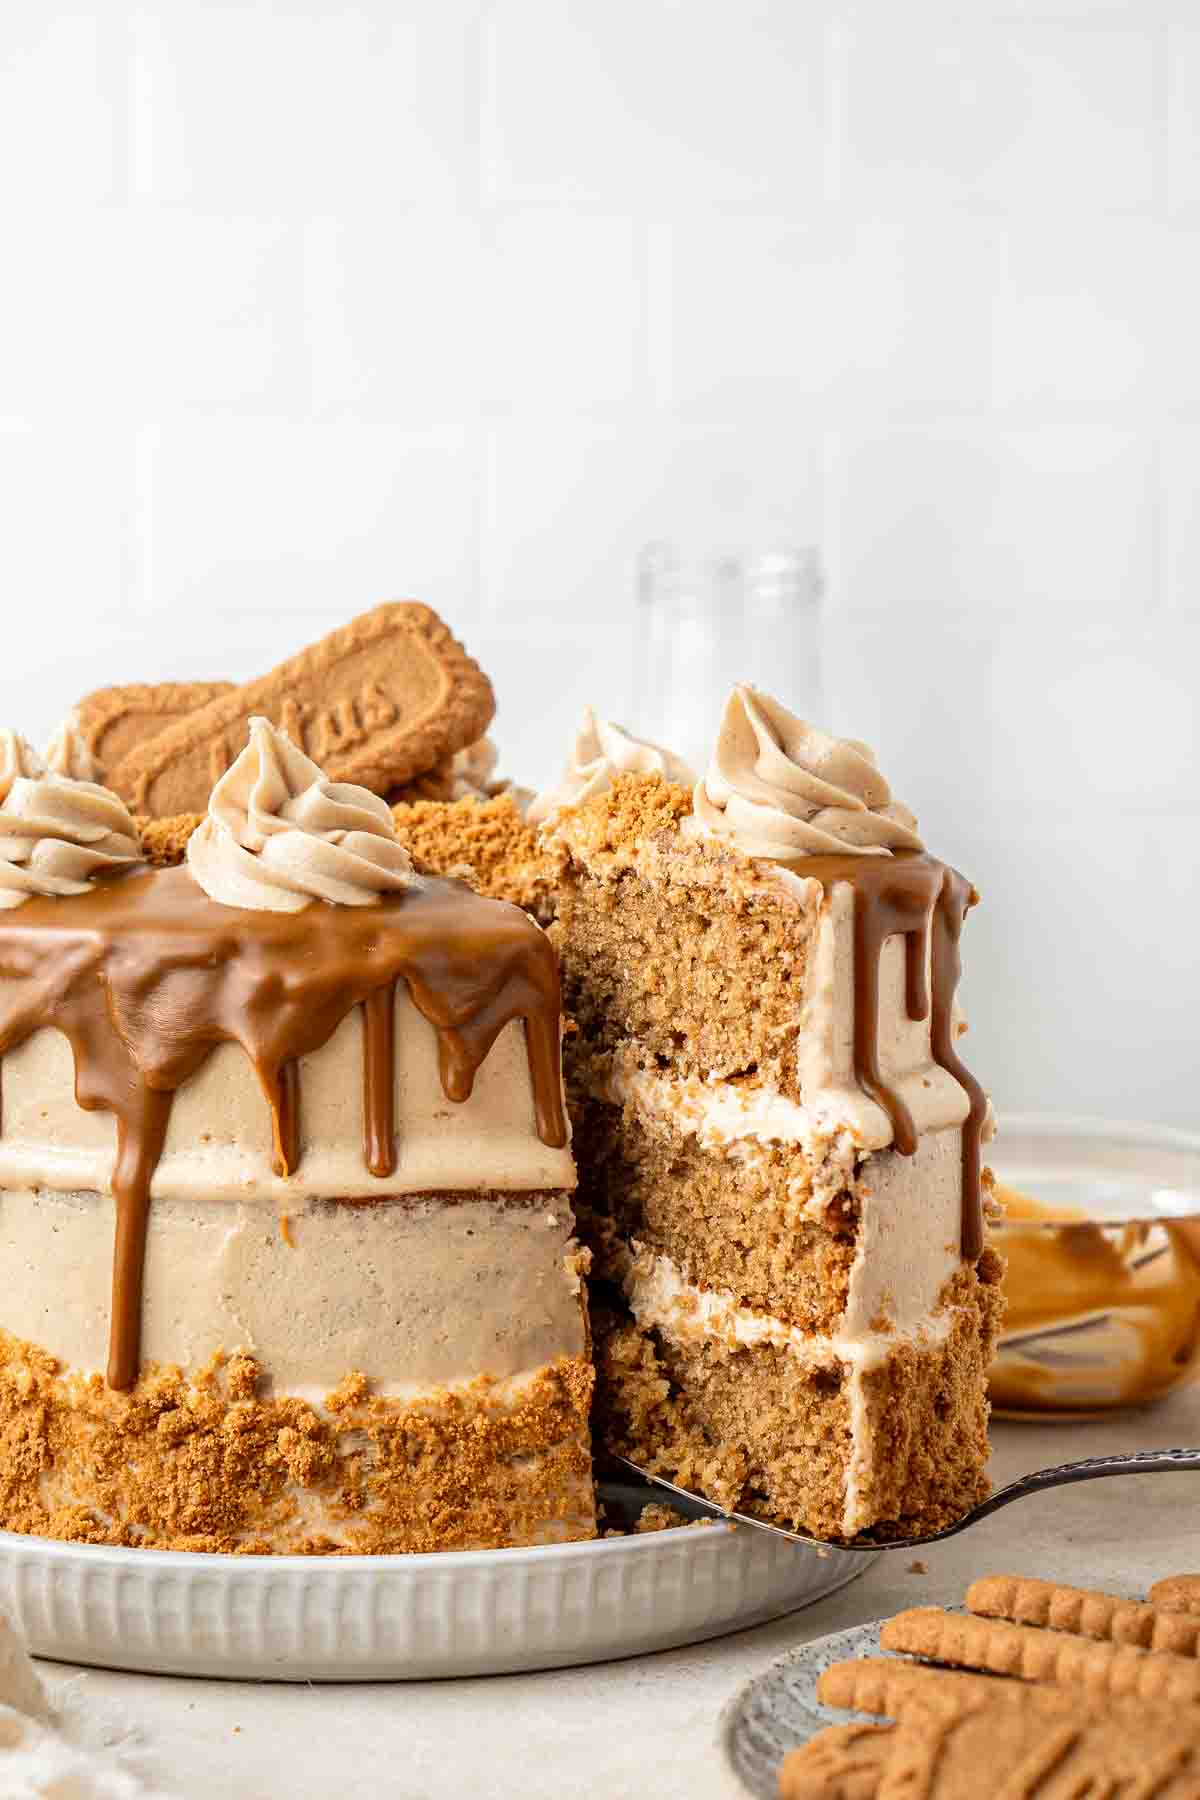 Cutting and serving a slice of biscoff cake.